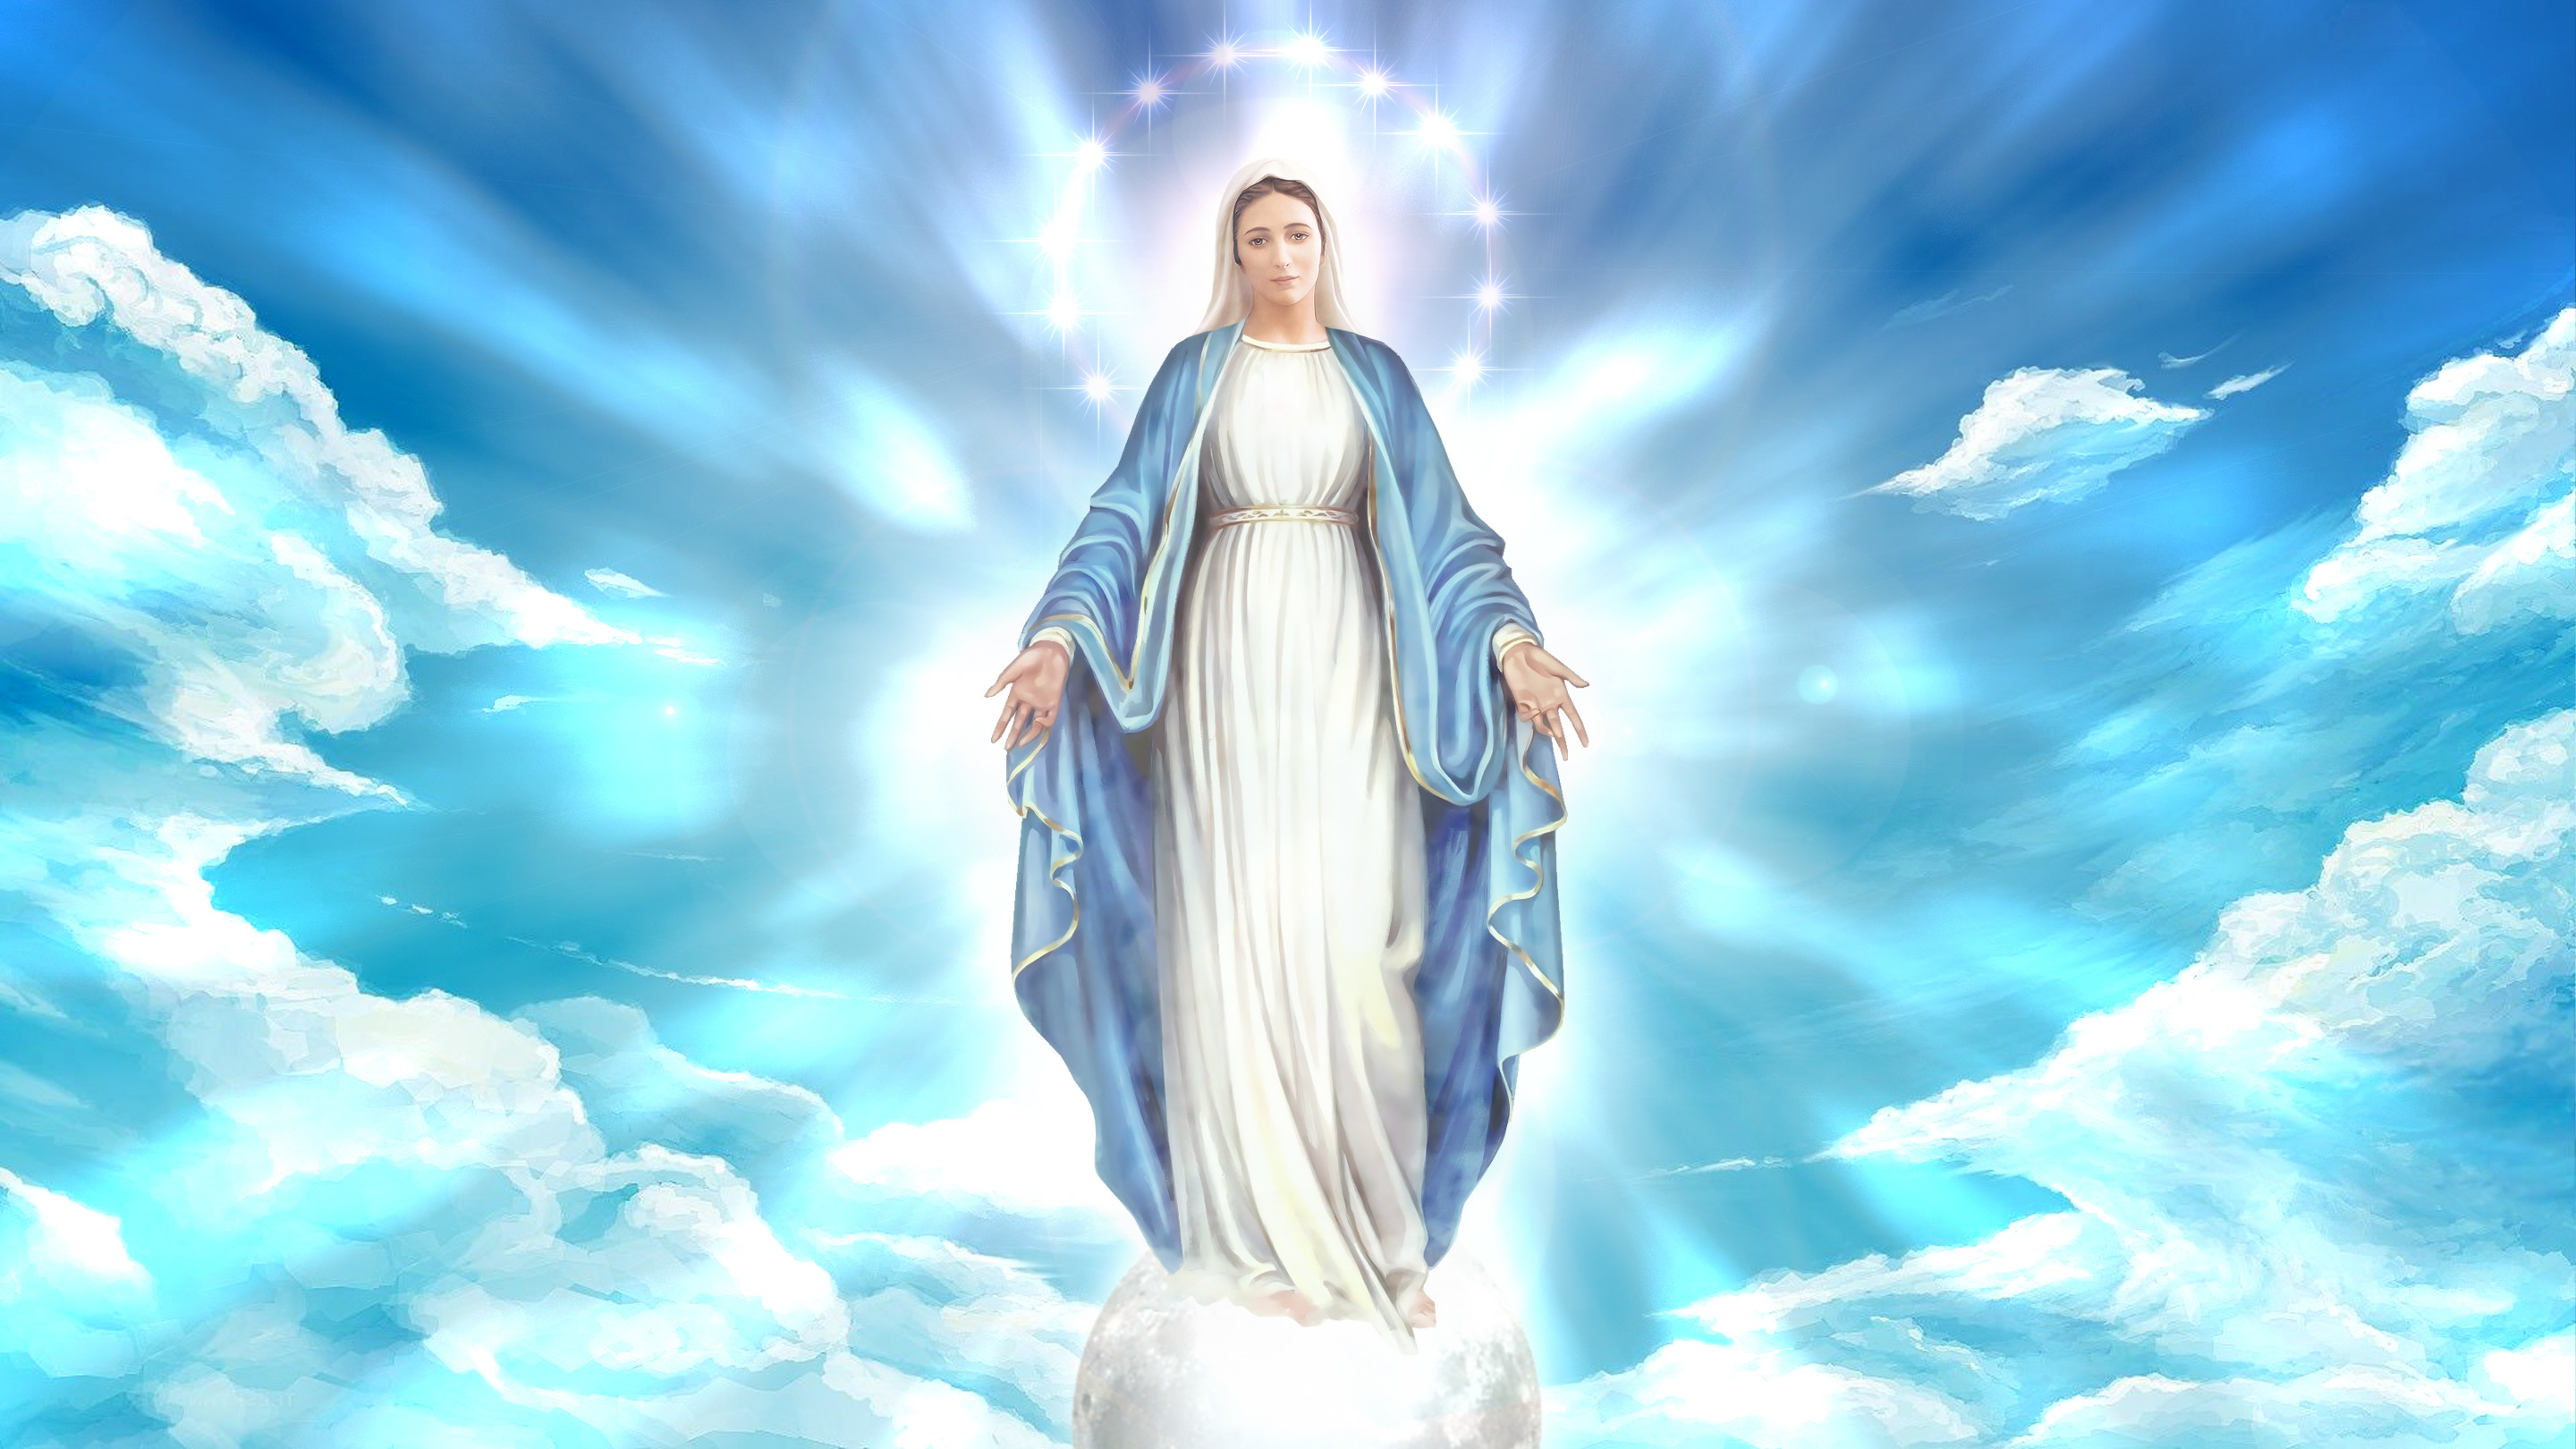 Mother Mary Wallpaper 53 images 2880x1620